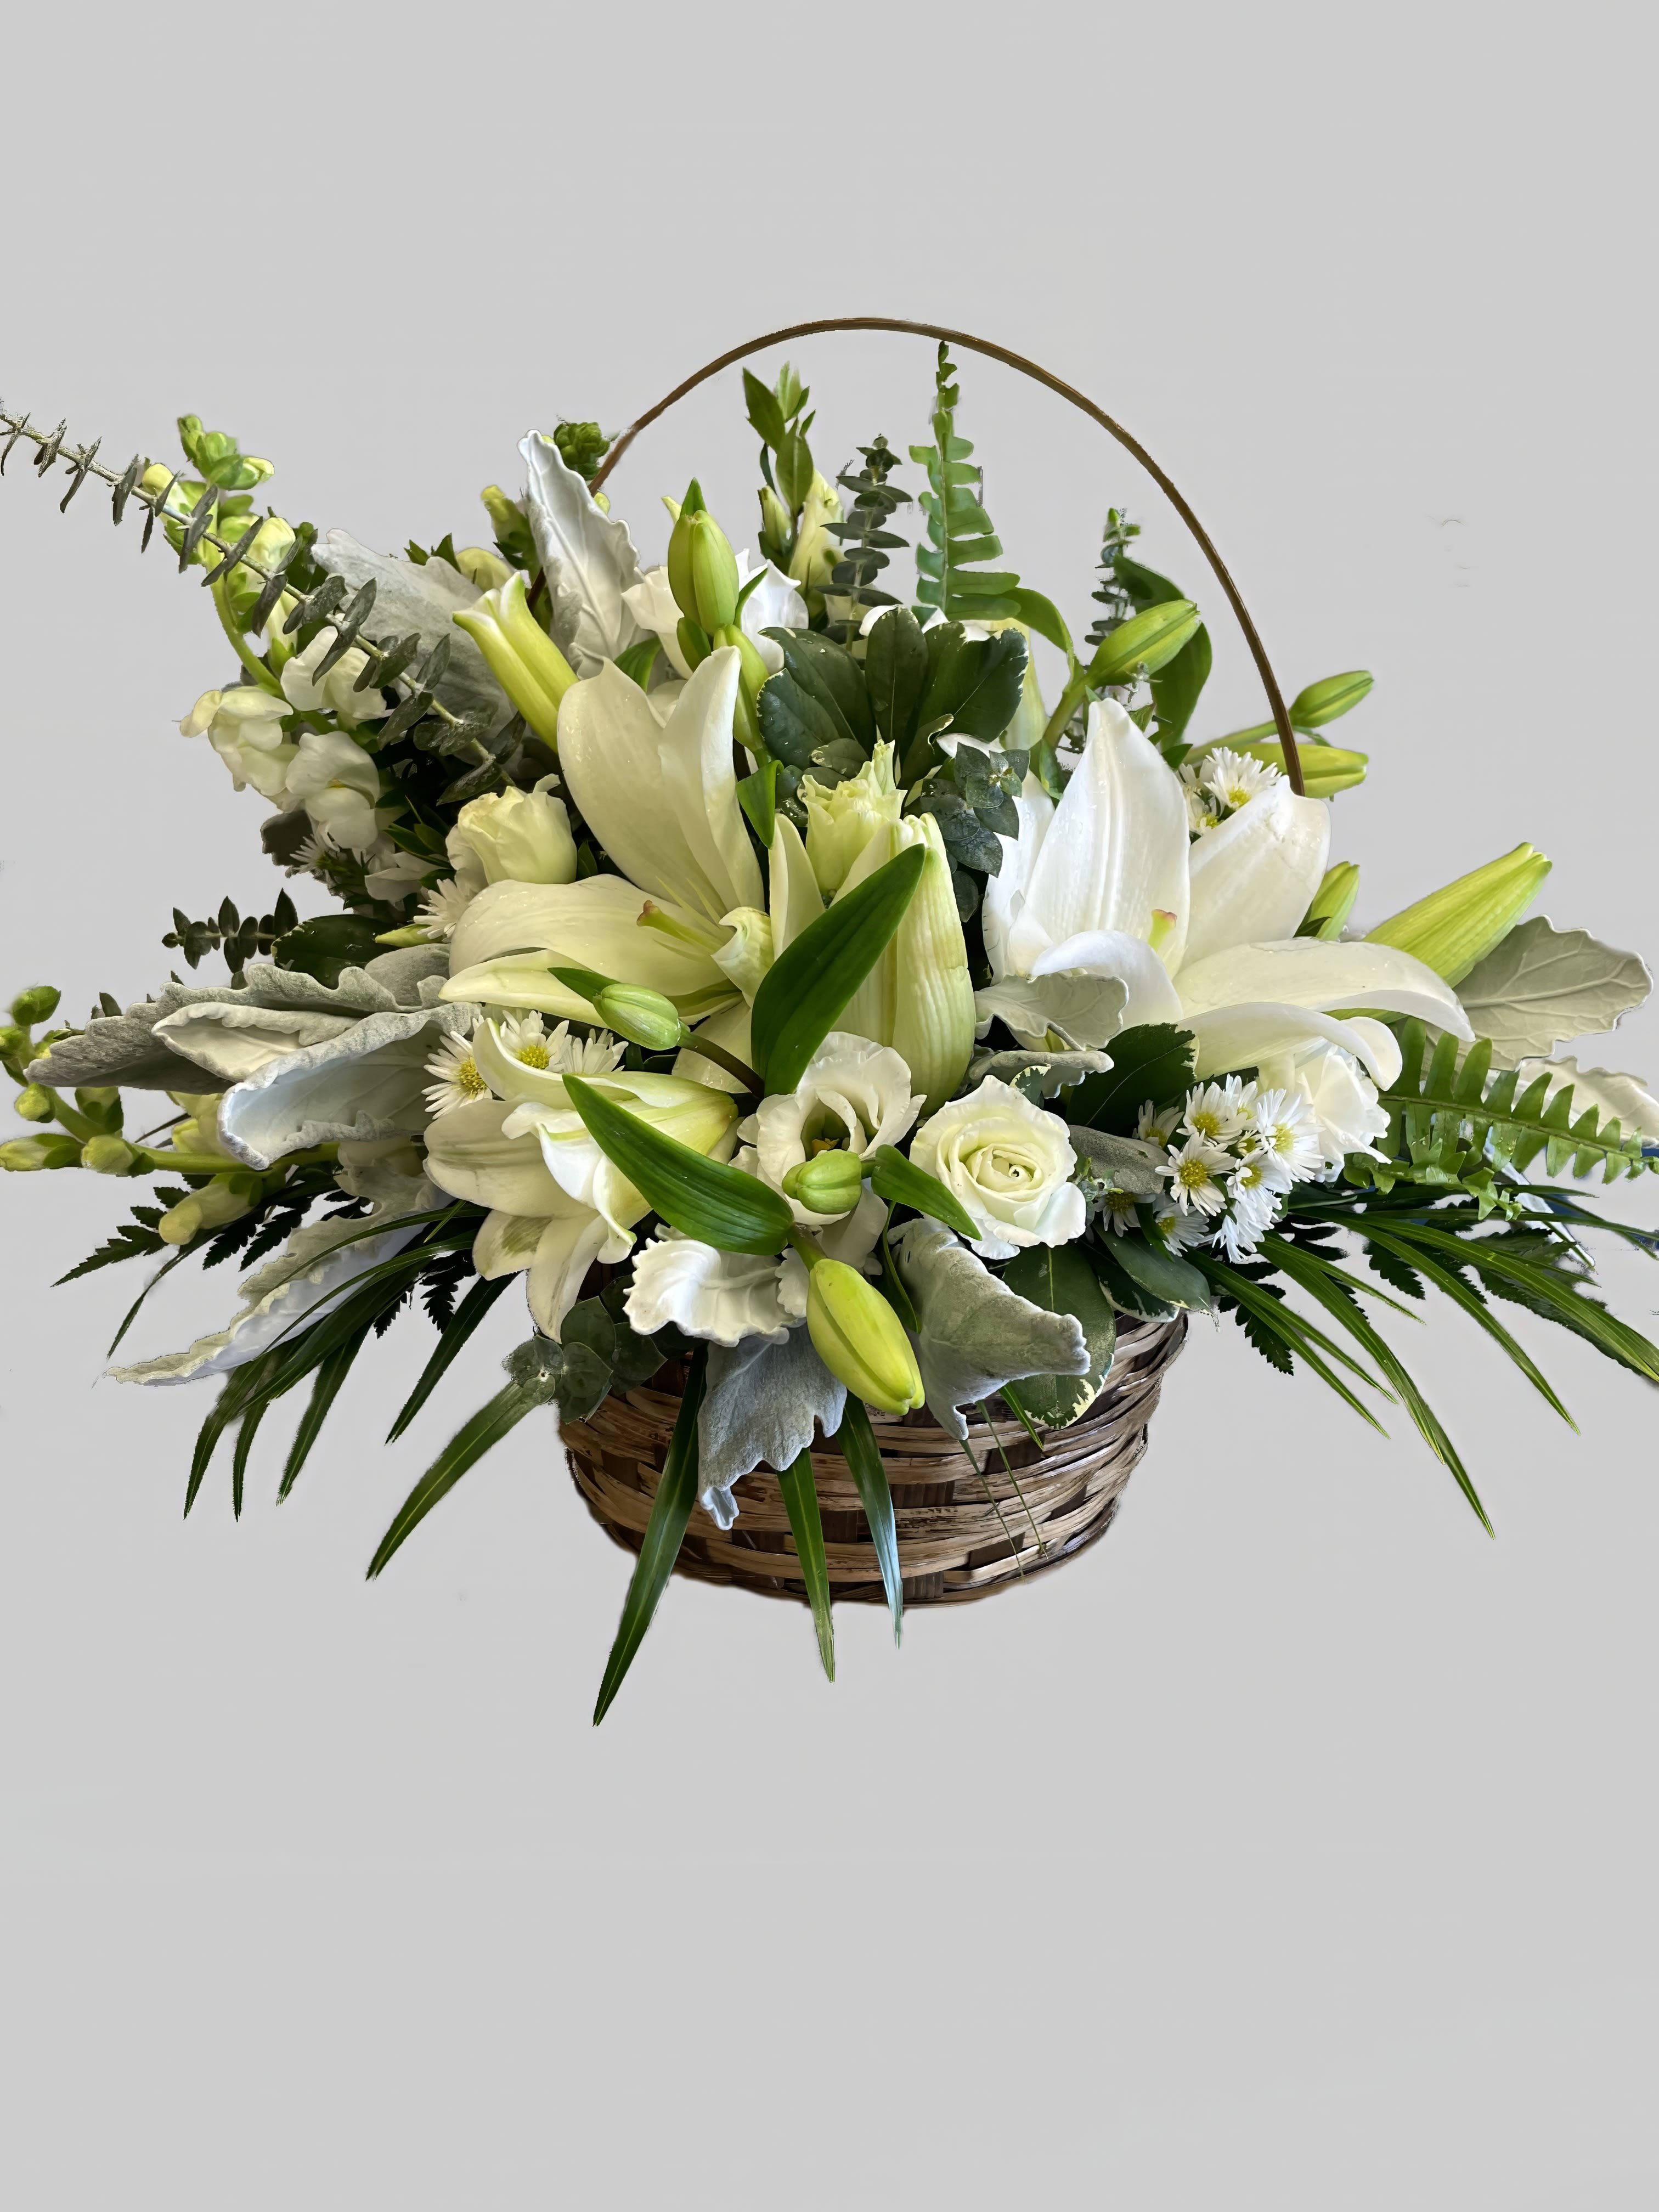 Basket of Roses &amp; Lillies  - This basket full of lilies, roses, lisianthus flowers and assorted greenery will work for any occasion. Color changes available for flowers. 